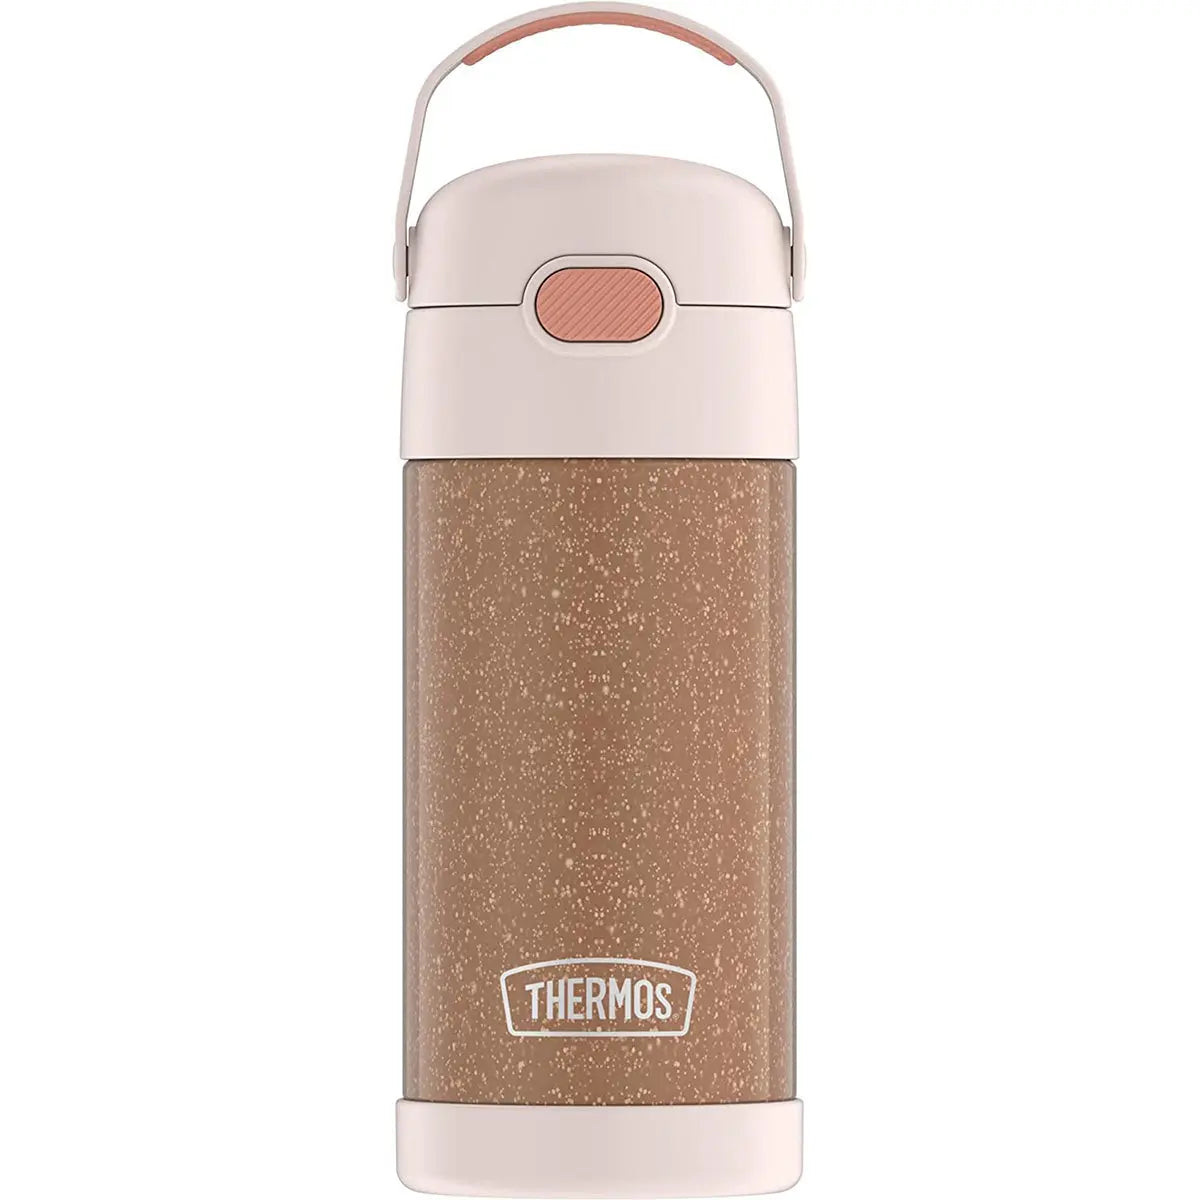 Thermos 12 oz. Kid's Glitter Funtainer Insulated Stainless Steel Water Bottle Thermos